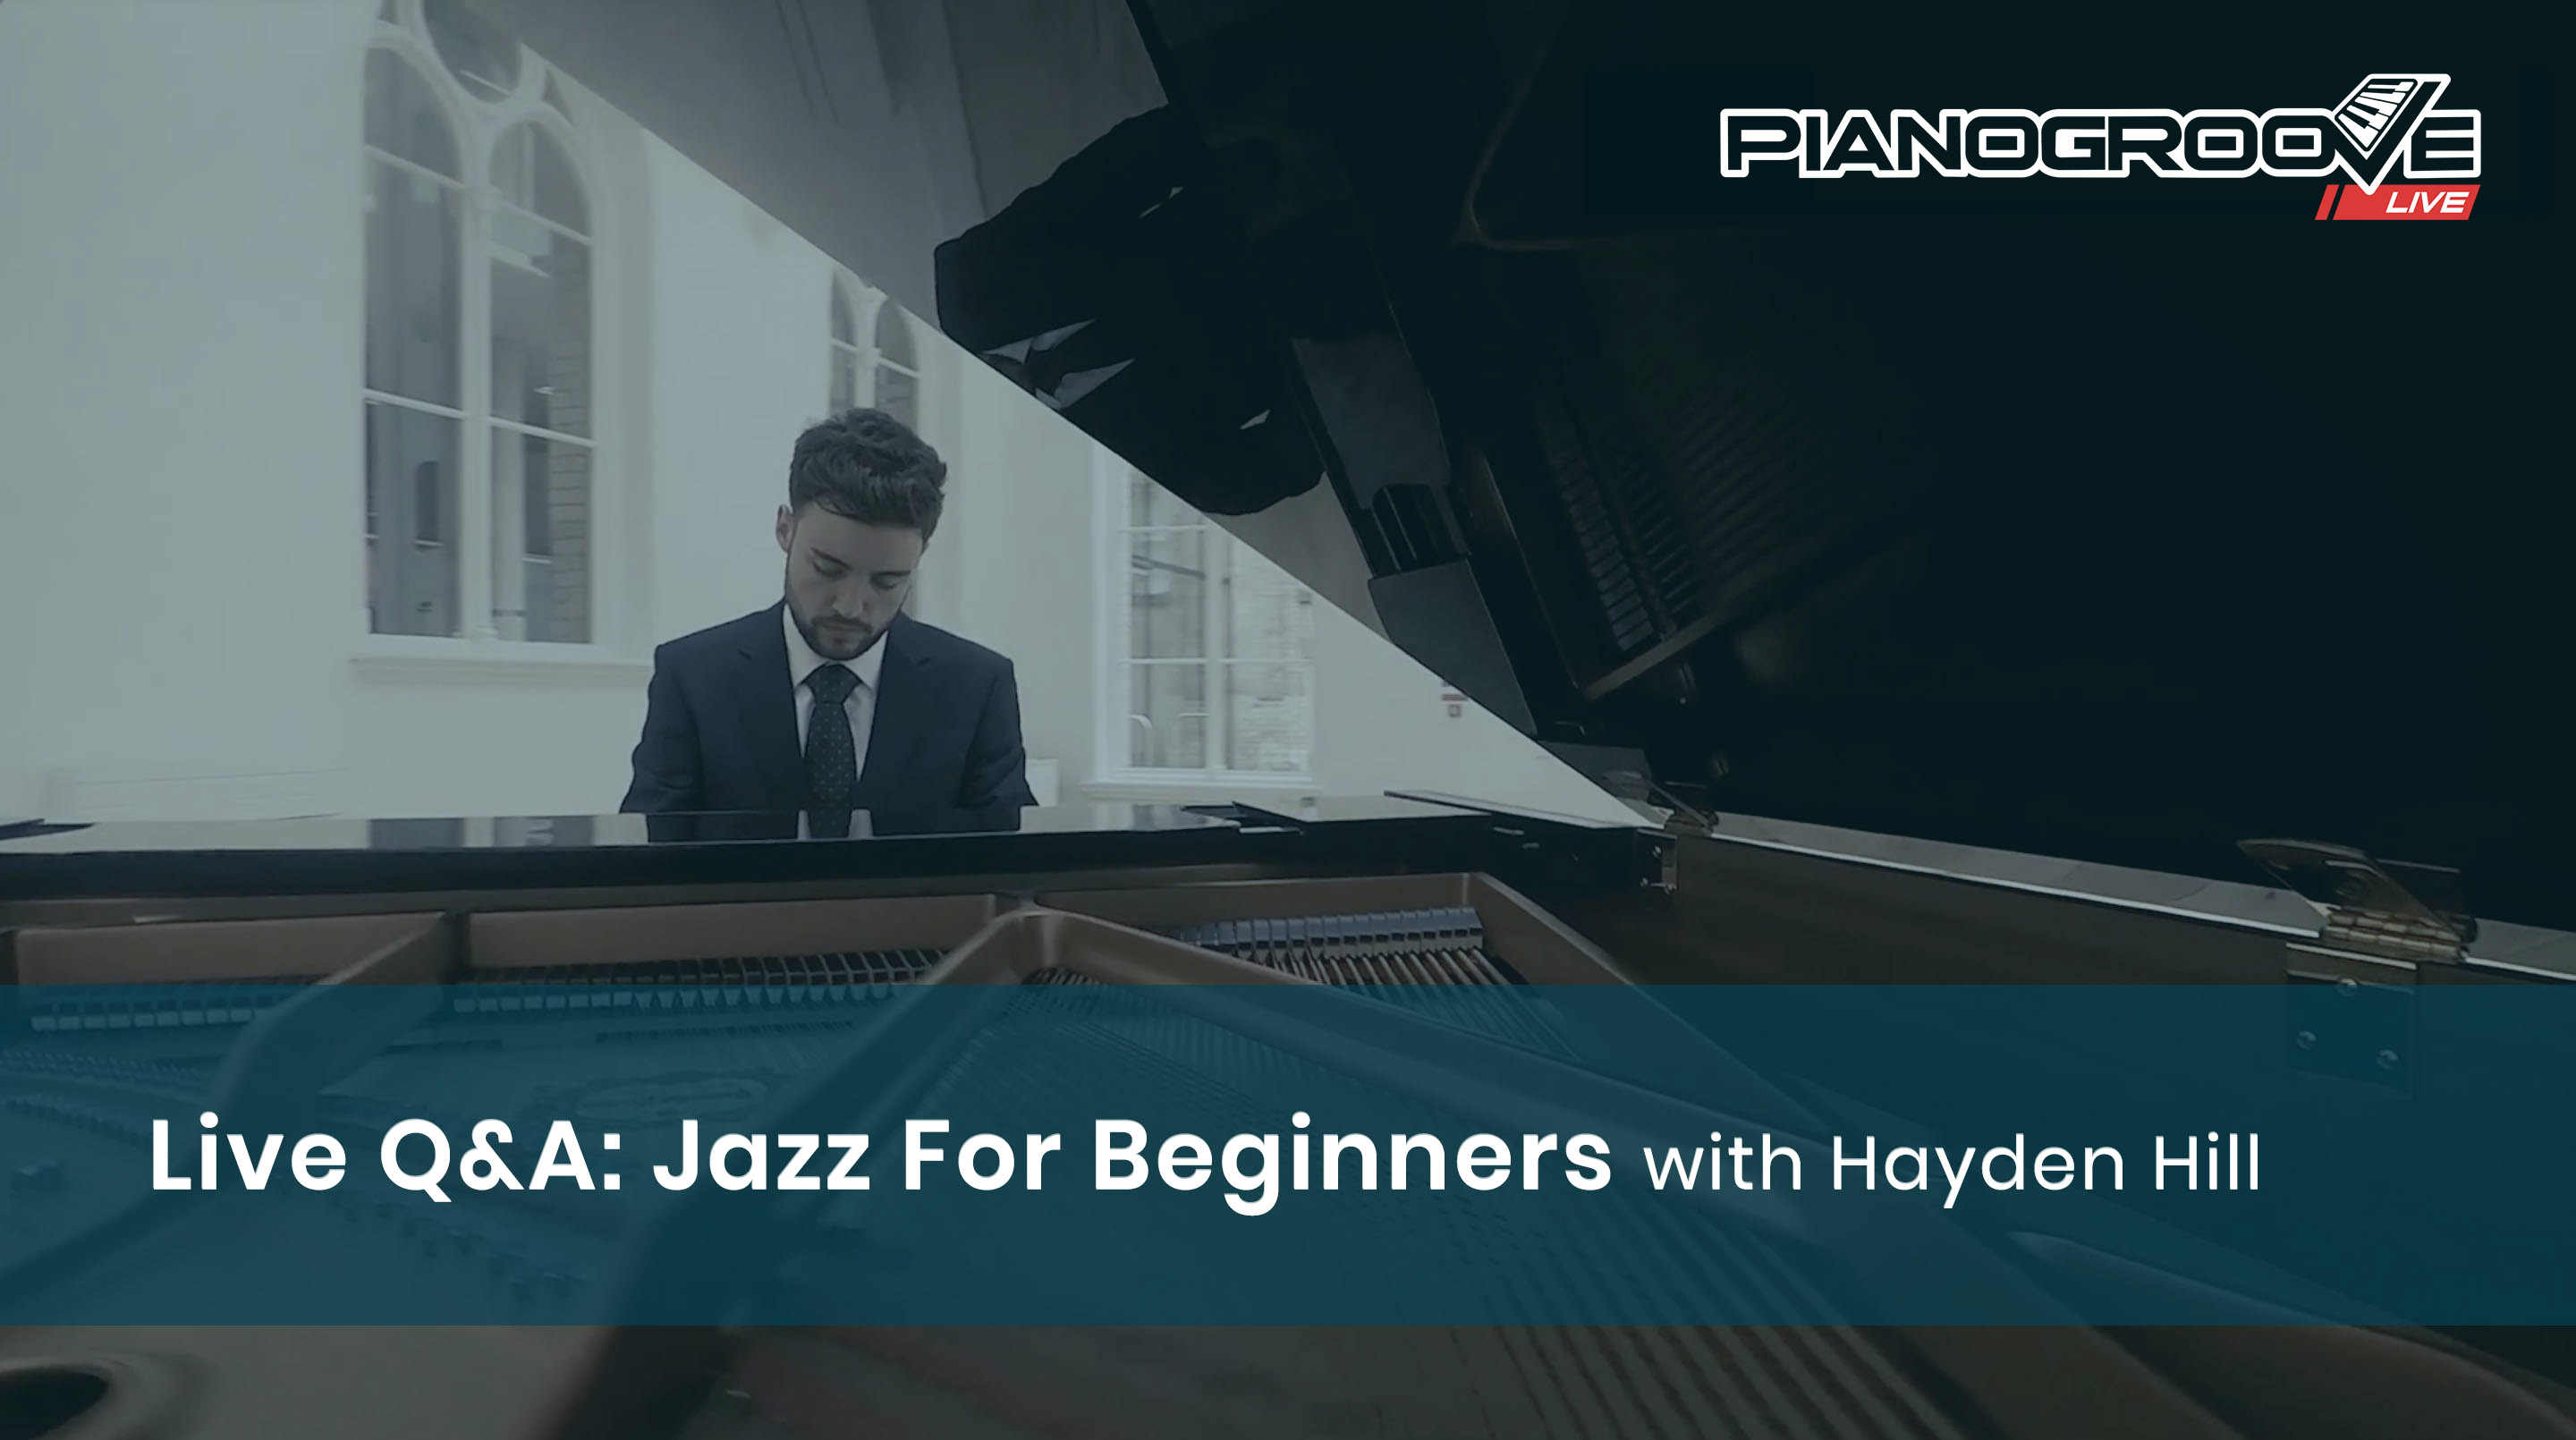 Live Q&A - Jazz For Beginners